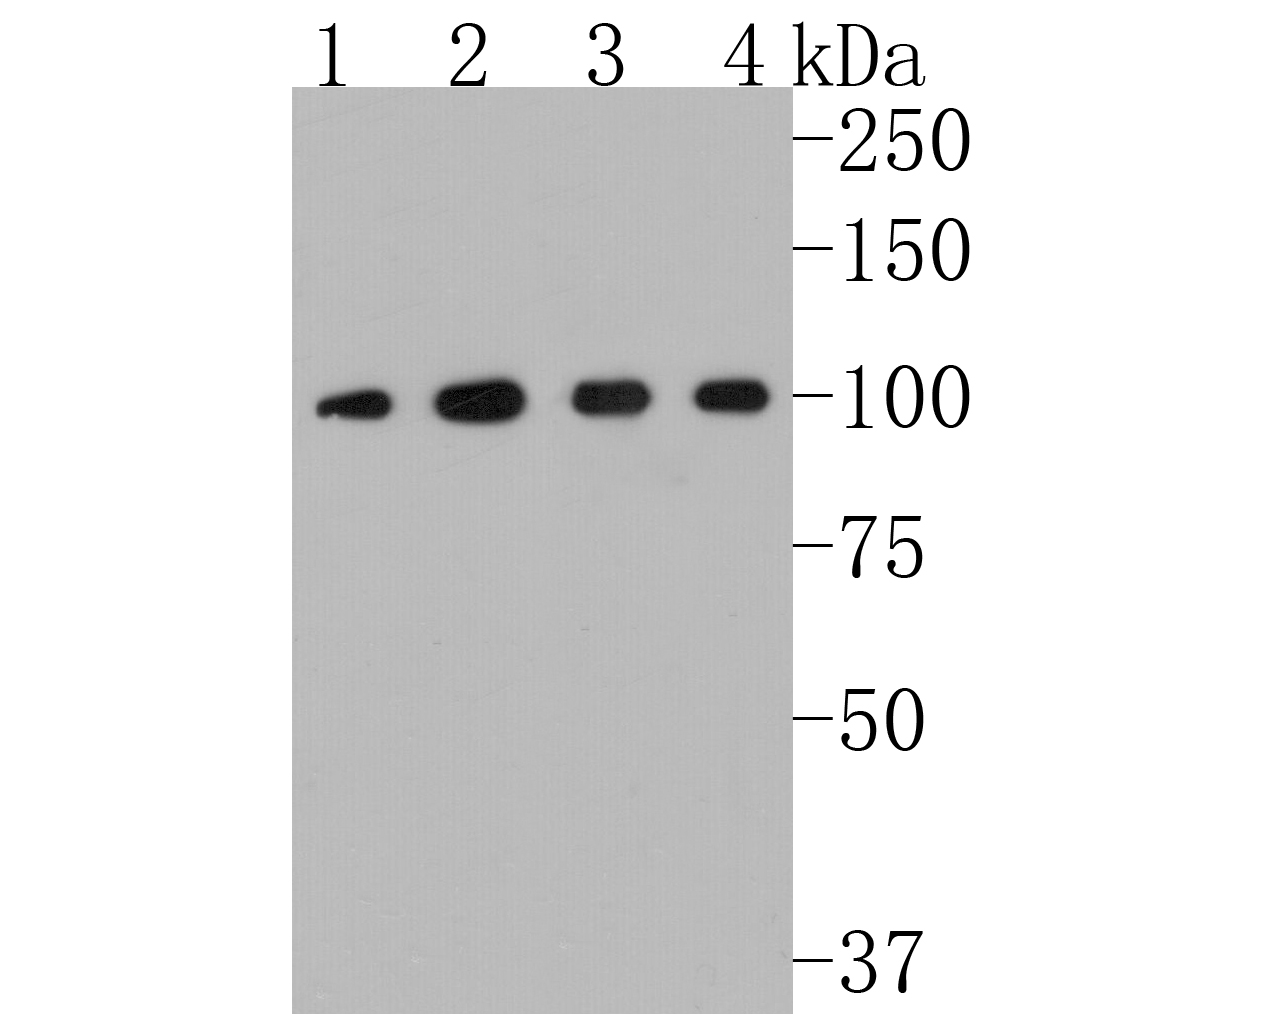 Western blot analysis of MVP on different lysates. Proteins were transferred to a PVDF membrane and blocked with 5% BSA in PBS for 1 hour at room temperature. The primary antibody (ET1705-69, 1/500) was used in 5% BSA at room temperature for 2 hours. Goat Anti-Rabbit IgG - HRP Secondary Antibody (HA1001) at 1:5,000 dilution was used for 1 hour at room temperature.<br />
Positive control: <br />
Lane 1: A549 cell lysate<br />
Lane 2: PC-12 cell lysate<br />
Lane 3: Hela cell lysate<br />
Lane 4: Mouse lung tissue lysate